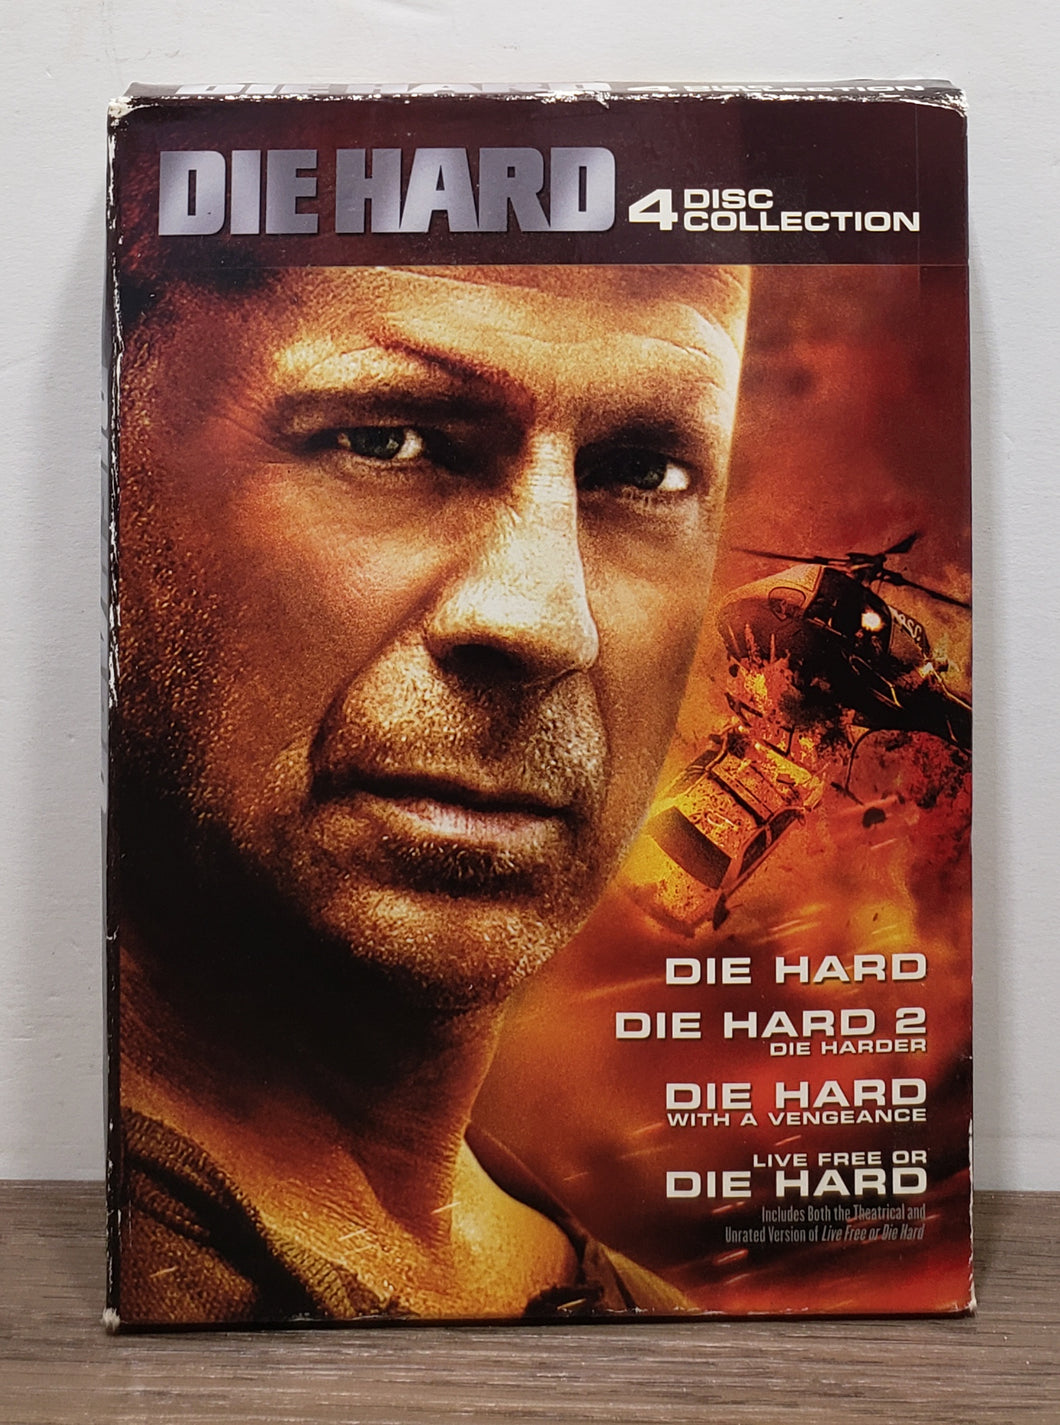 Die Hard: 4-Disc Collection